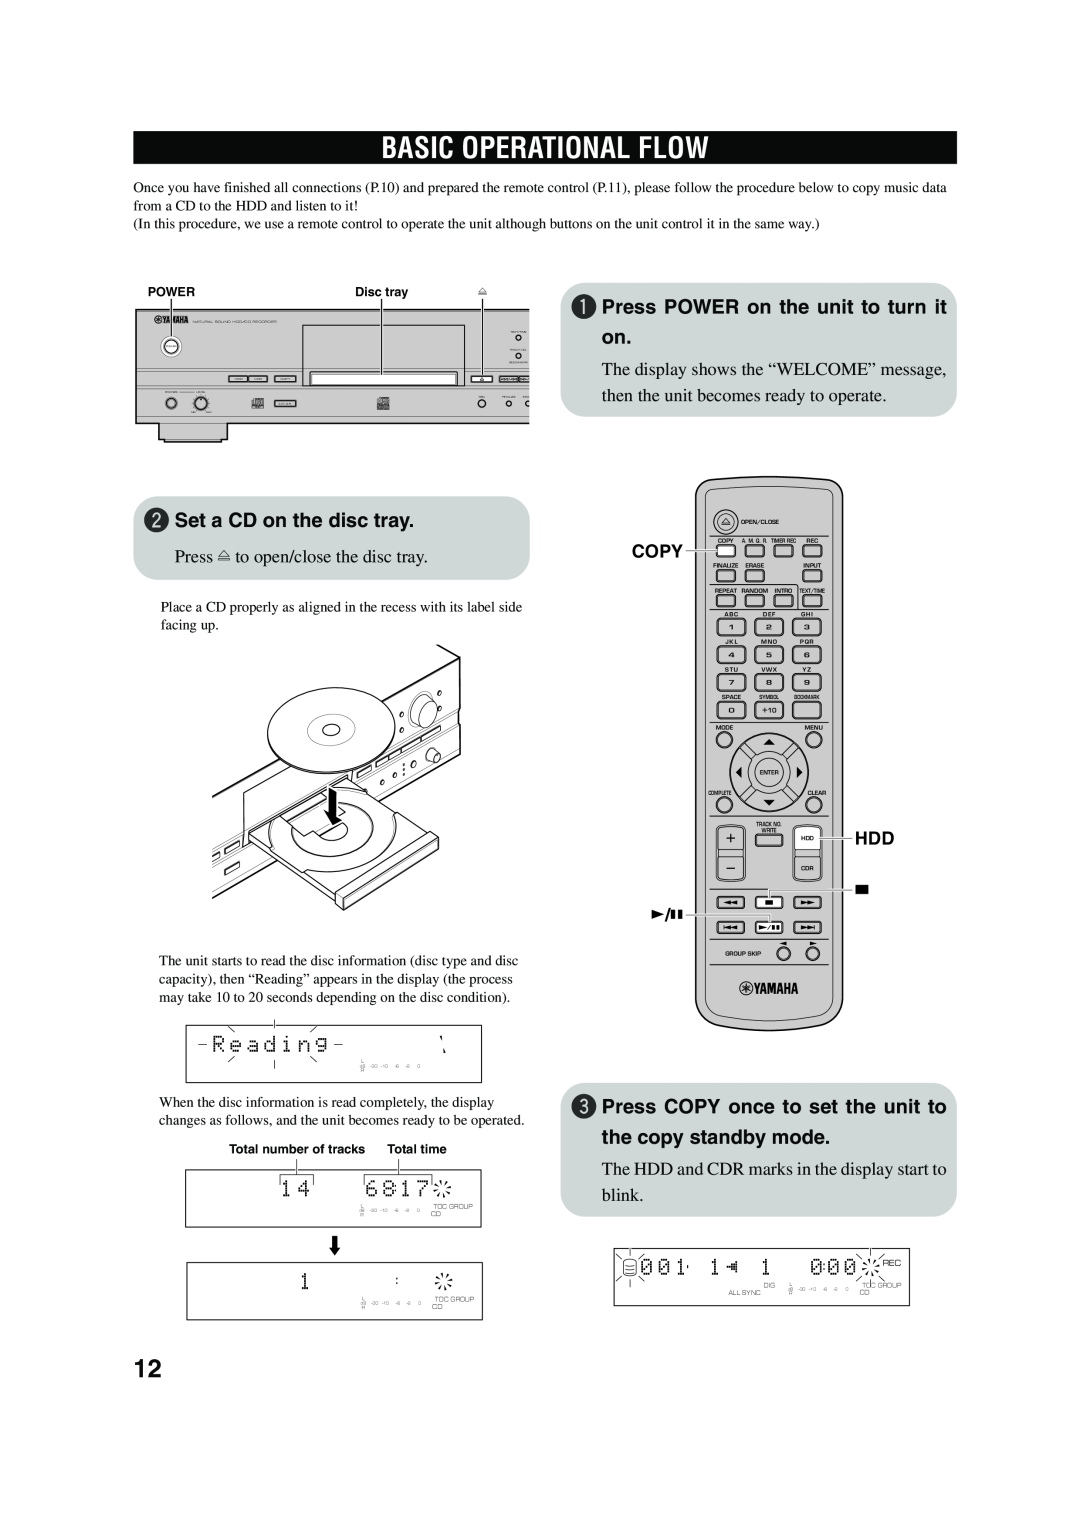 Yamaha CDR-HD 1500 owner manual Basic Operational Flow, R e a d i n g, 1Press POWER on the unit to turn it on, Copy 